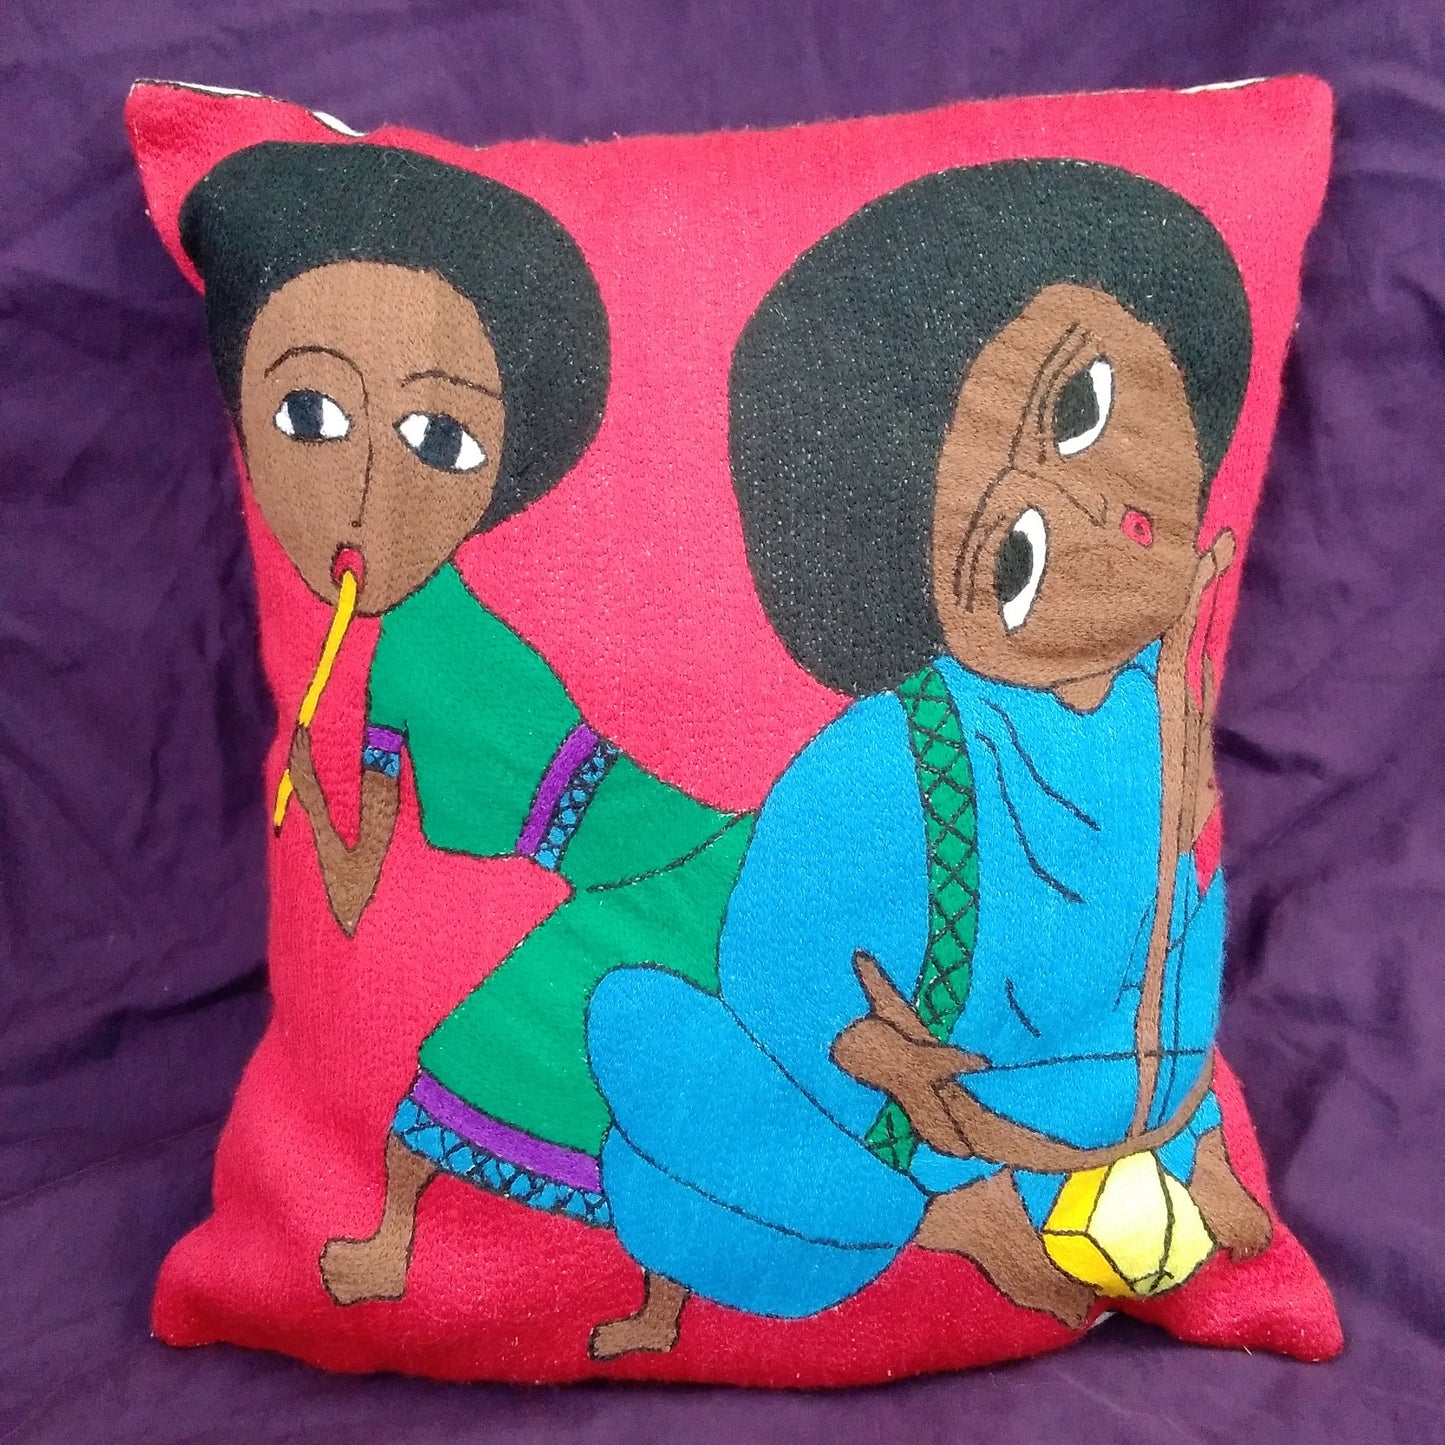 Handmade Embroidery Ethiopian Pillow Cover - Women Playing Music